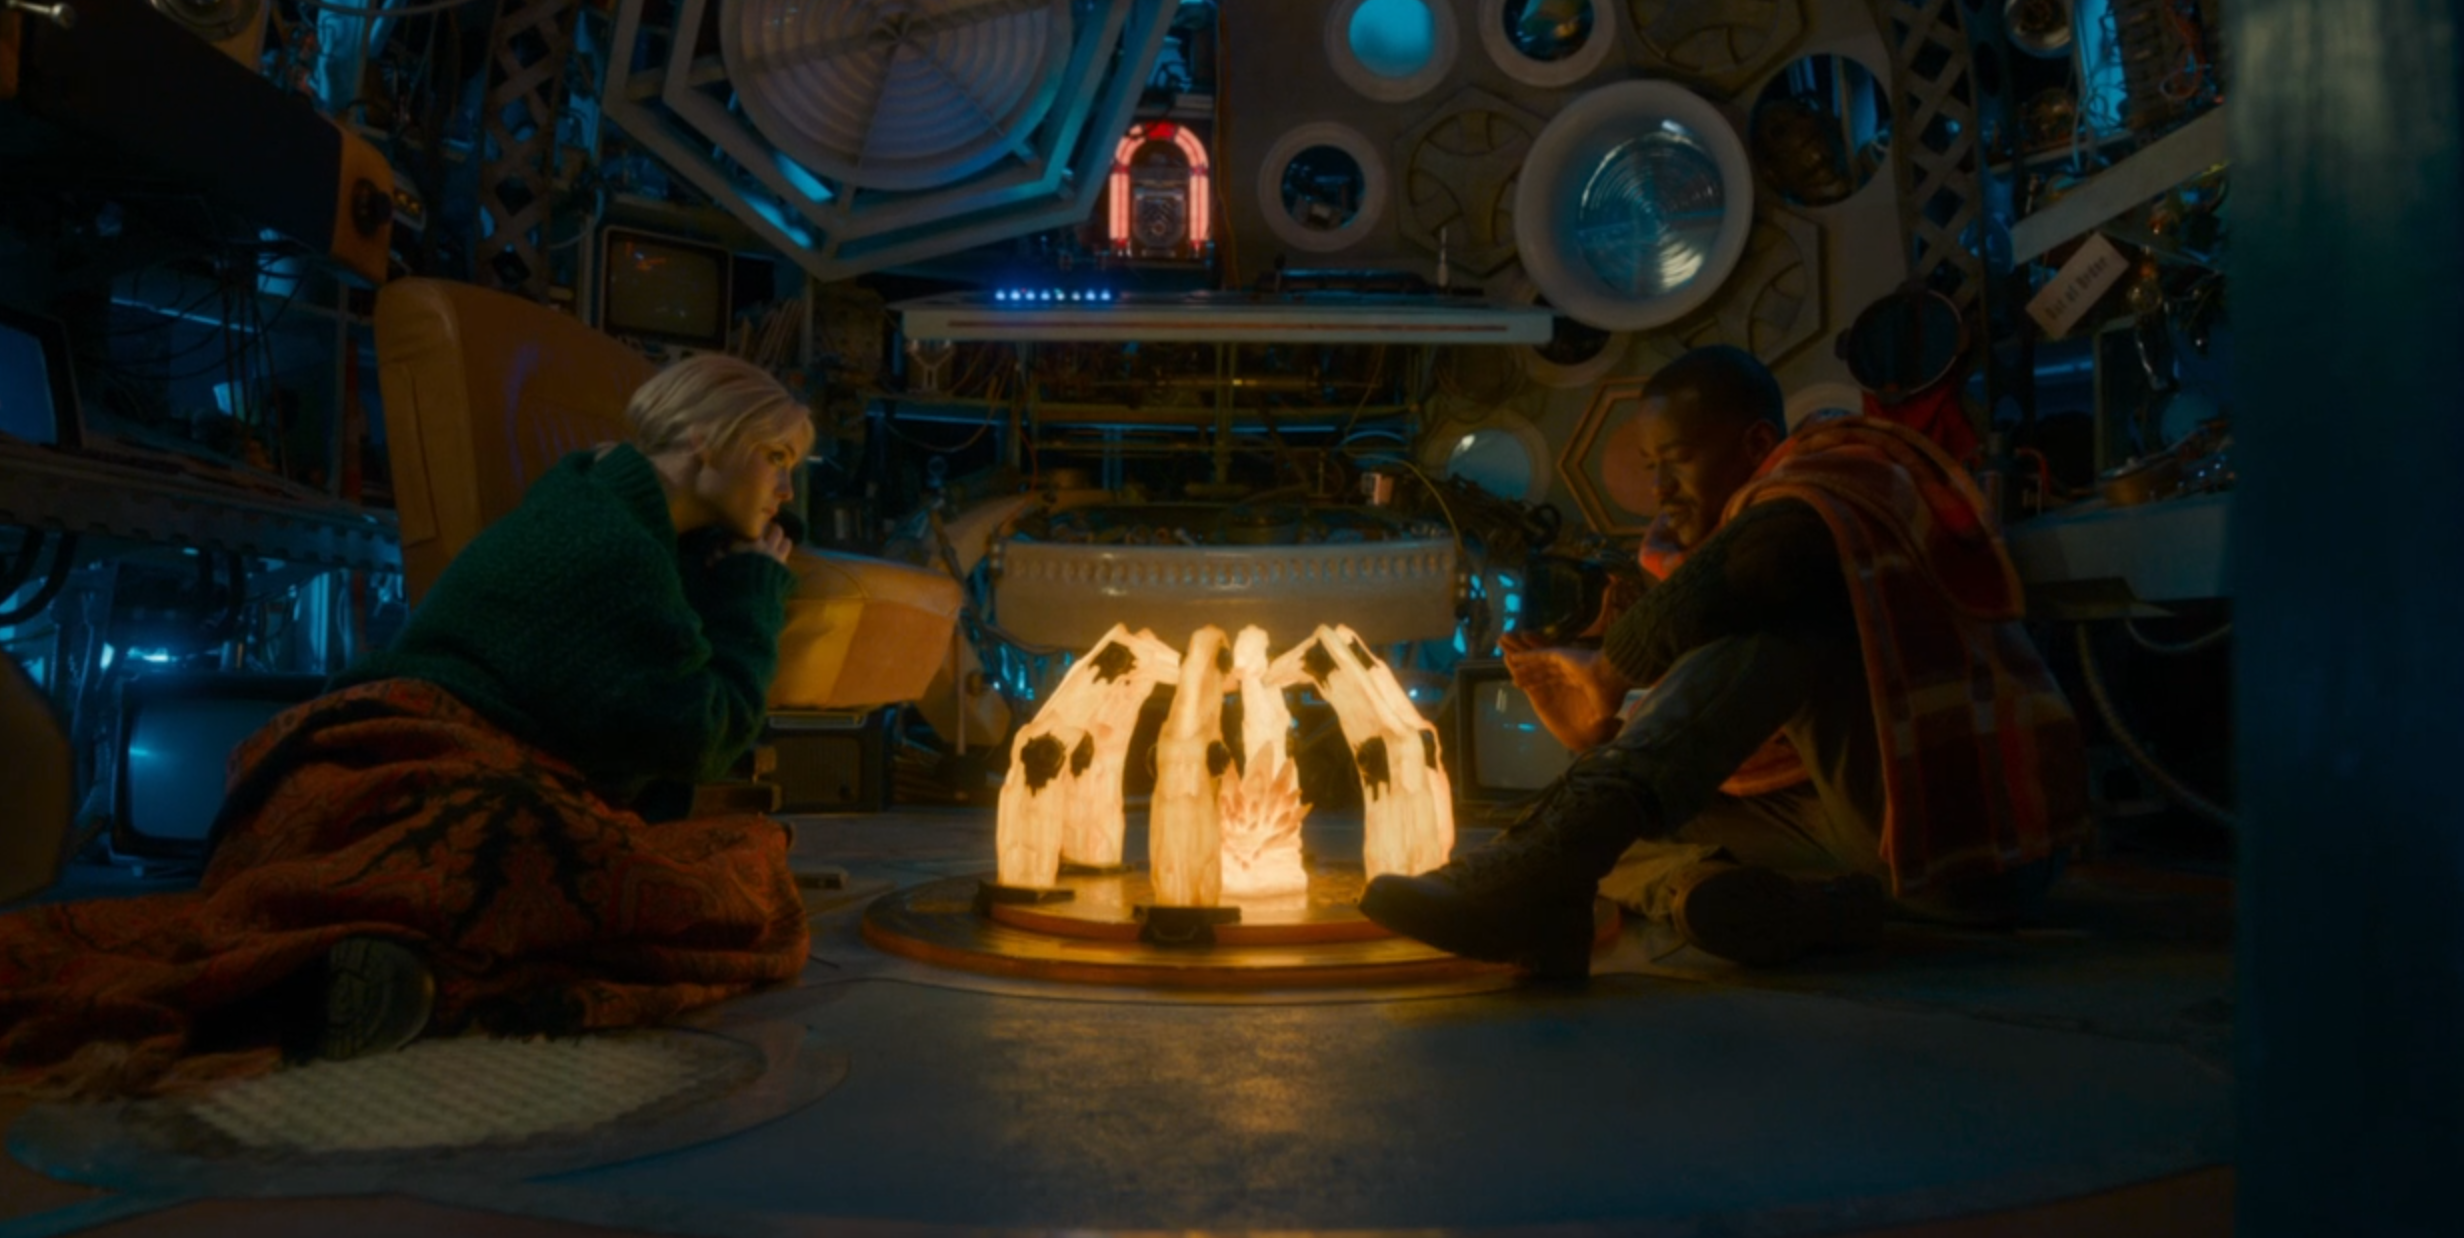 The Fifteenth Doctor and Ruby reflect in the Remembered TARDIS during their battle with Sutekh. (TV: Pyramids of Mars [+]Loading...["Pyramids of Mars (TotT TV story)"])